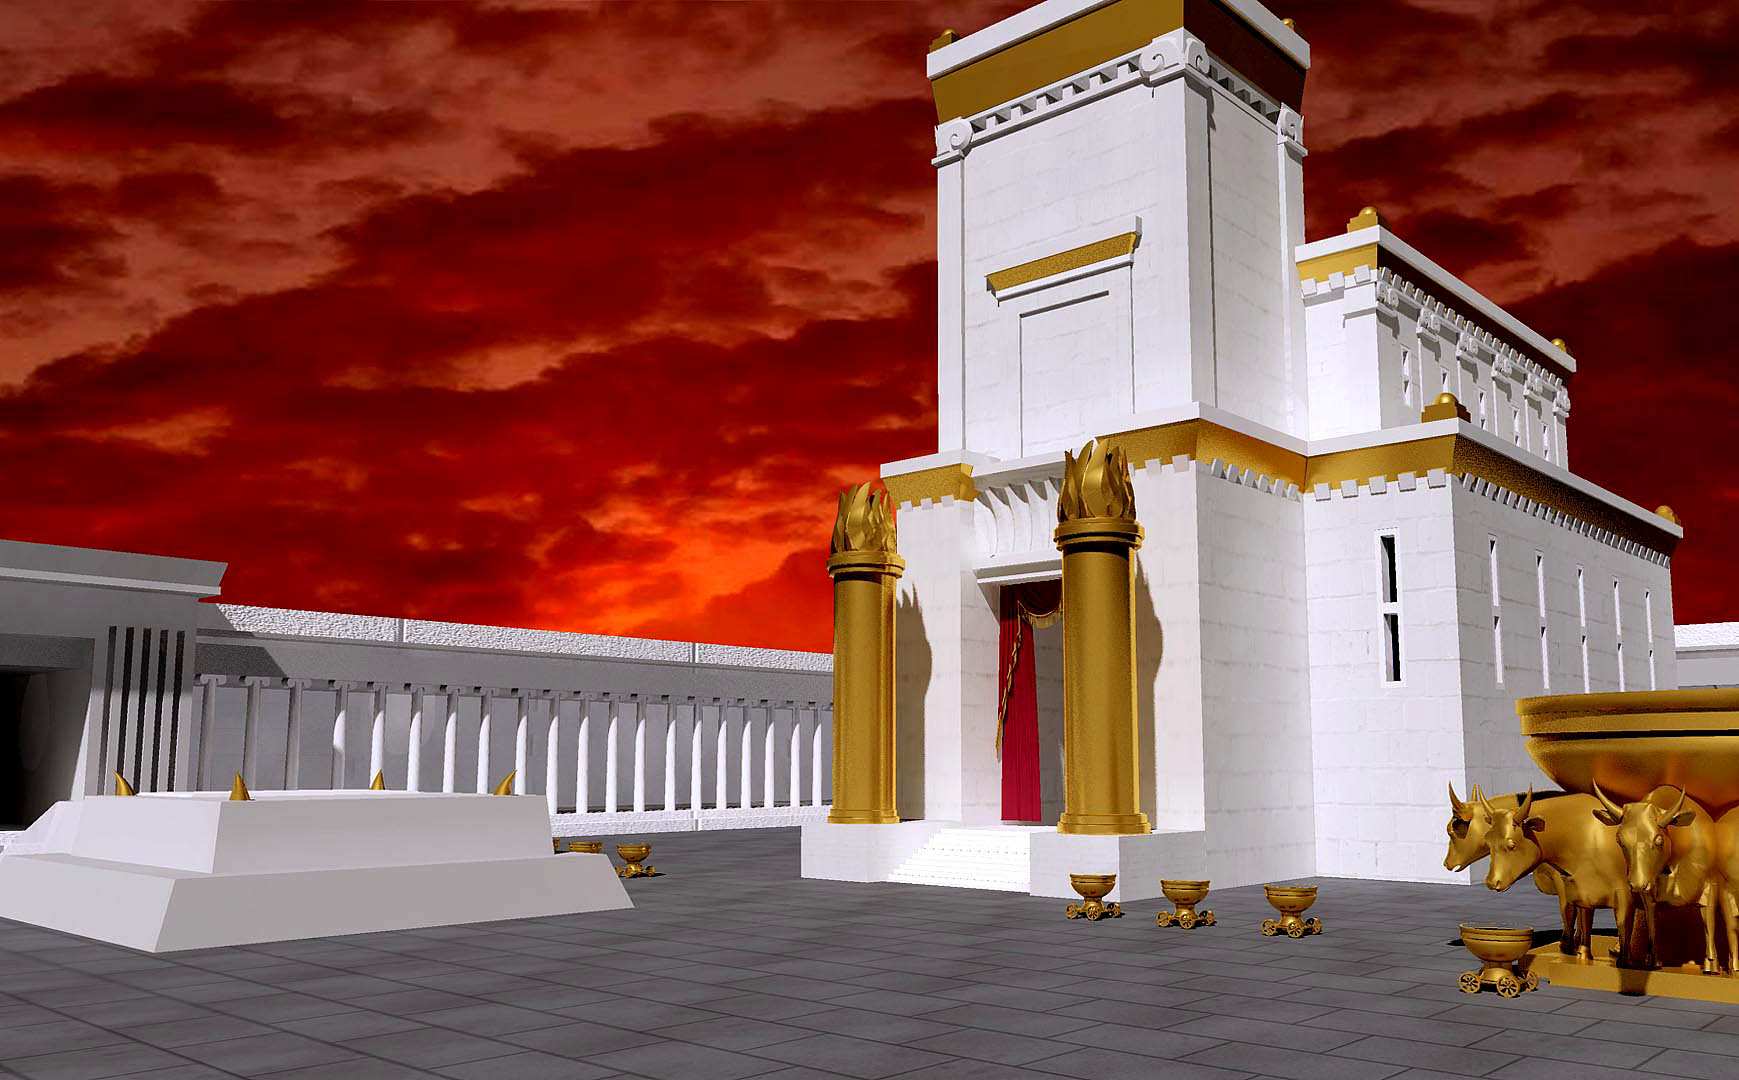 3D Representation of the Temple in Jerusalem